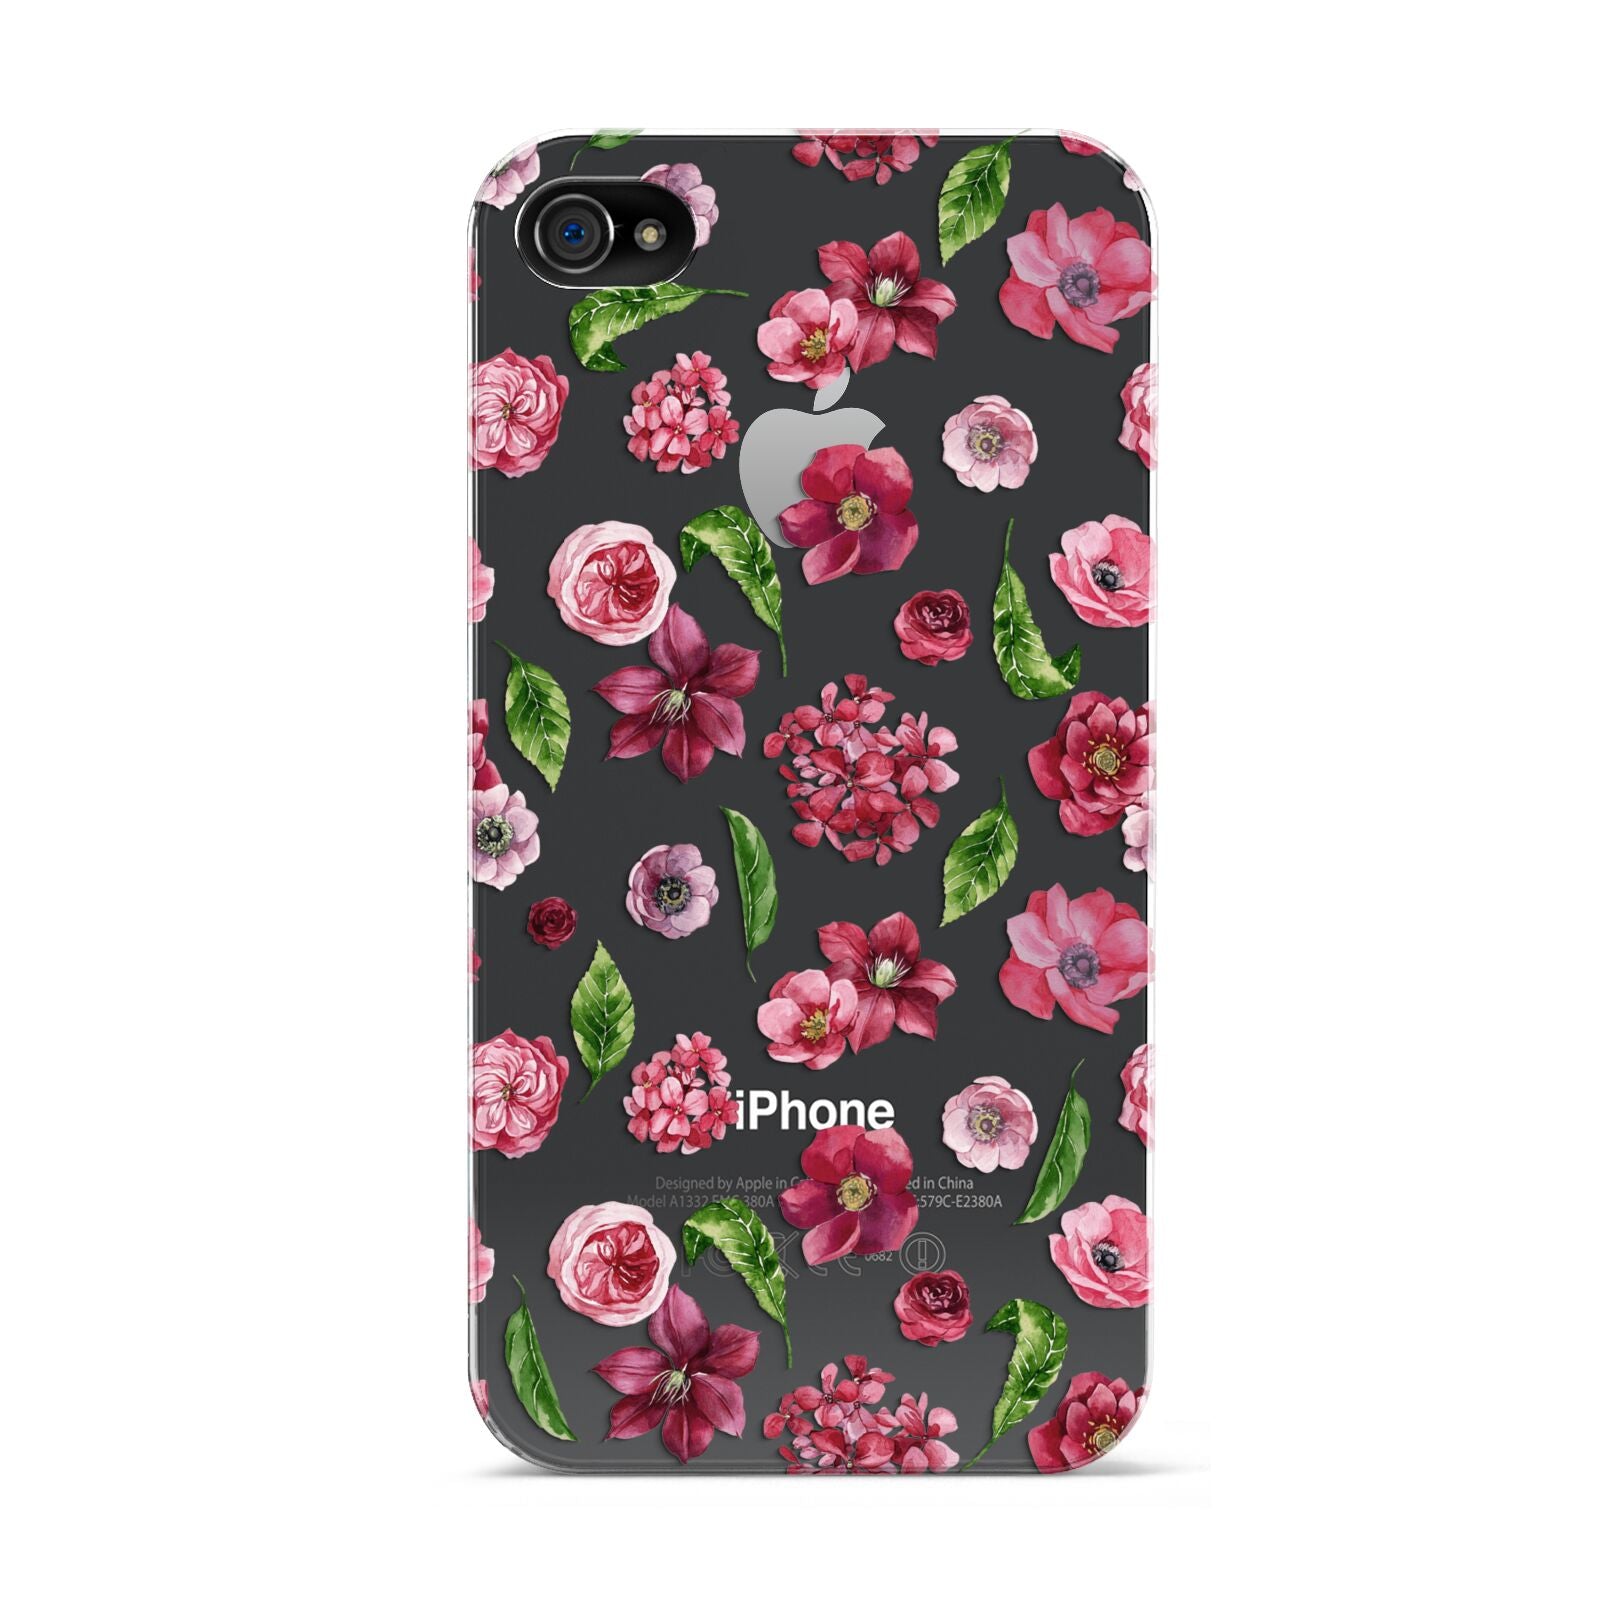 Pink Floral Apple iPhone 4s Case